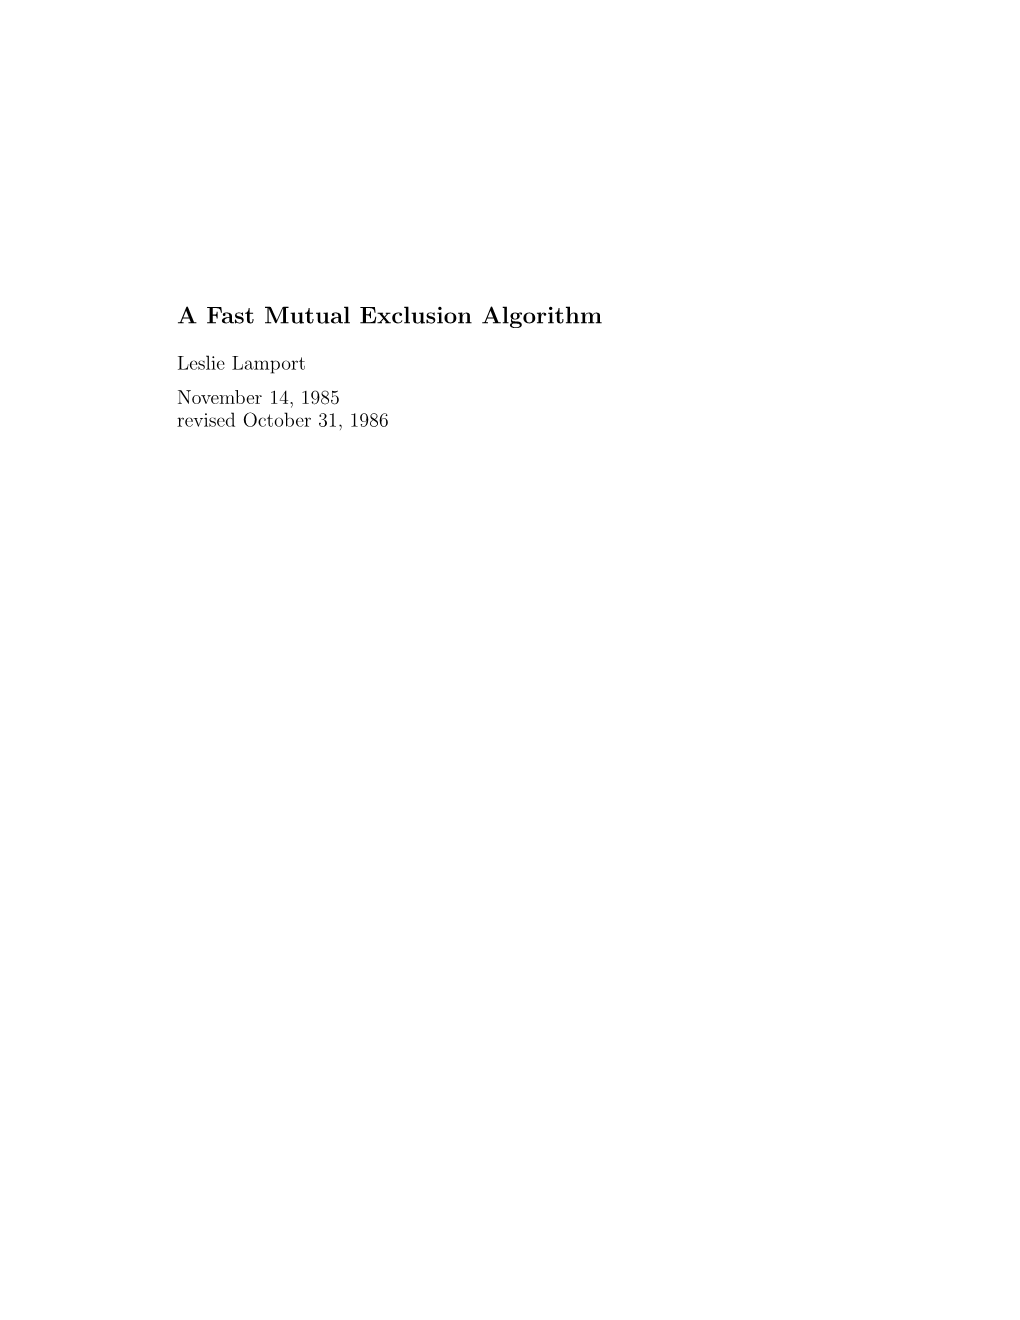 A Fast Mutual Exclusion Algorithm